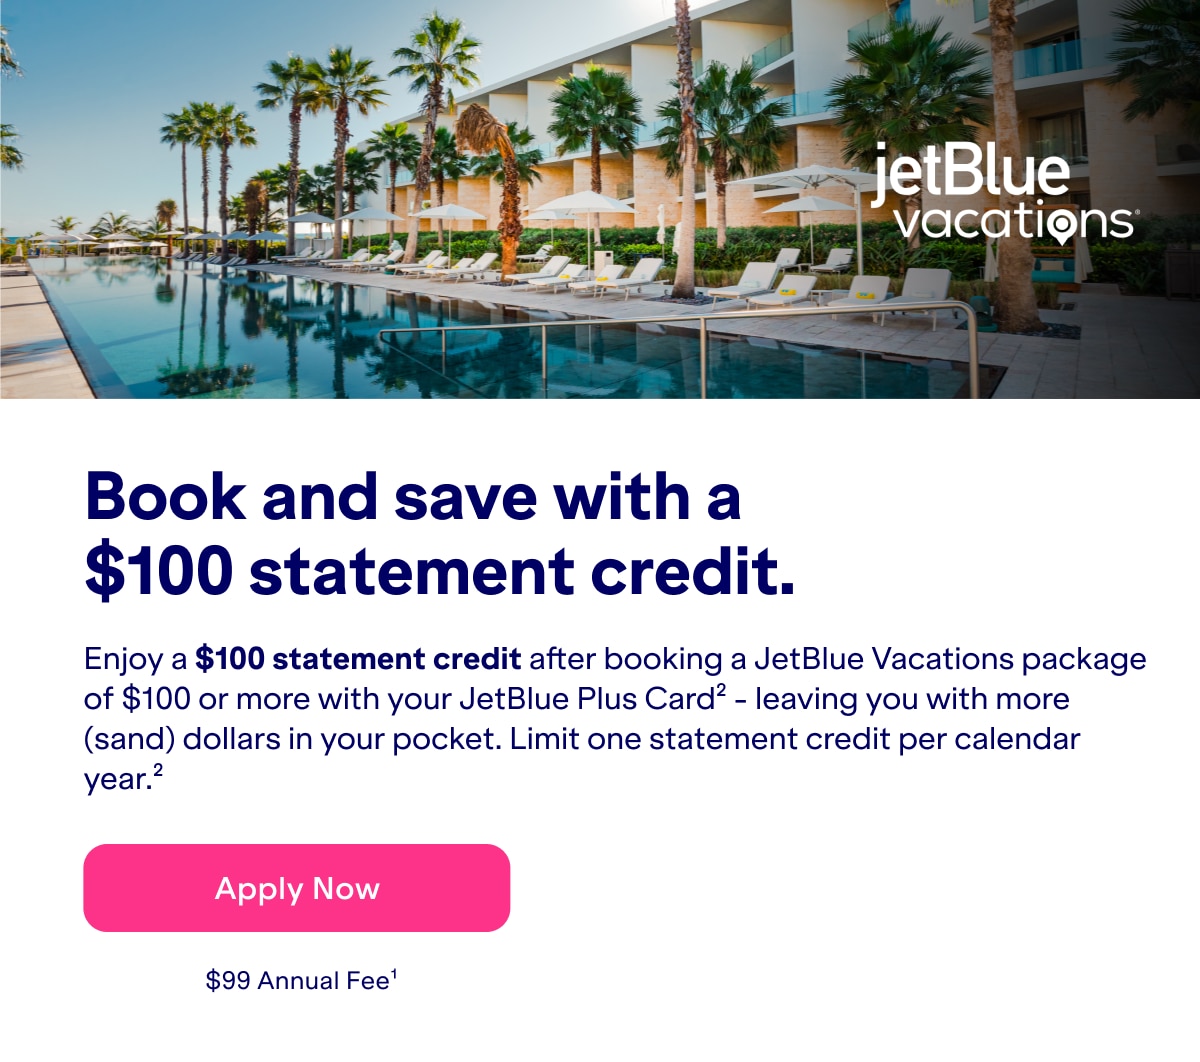 Book and save with a $100 statement credit. Enjoy a $100 statement credit after booking a JetBlue Vacations package of $100 or more with your JetBlue Plus Card - leaving you with more (sand) dollars in your pocket. Limit one statement credit per calendar year(2). Click here to apply now. $99 Annual Fee(1).